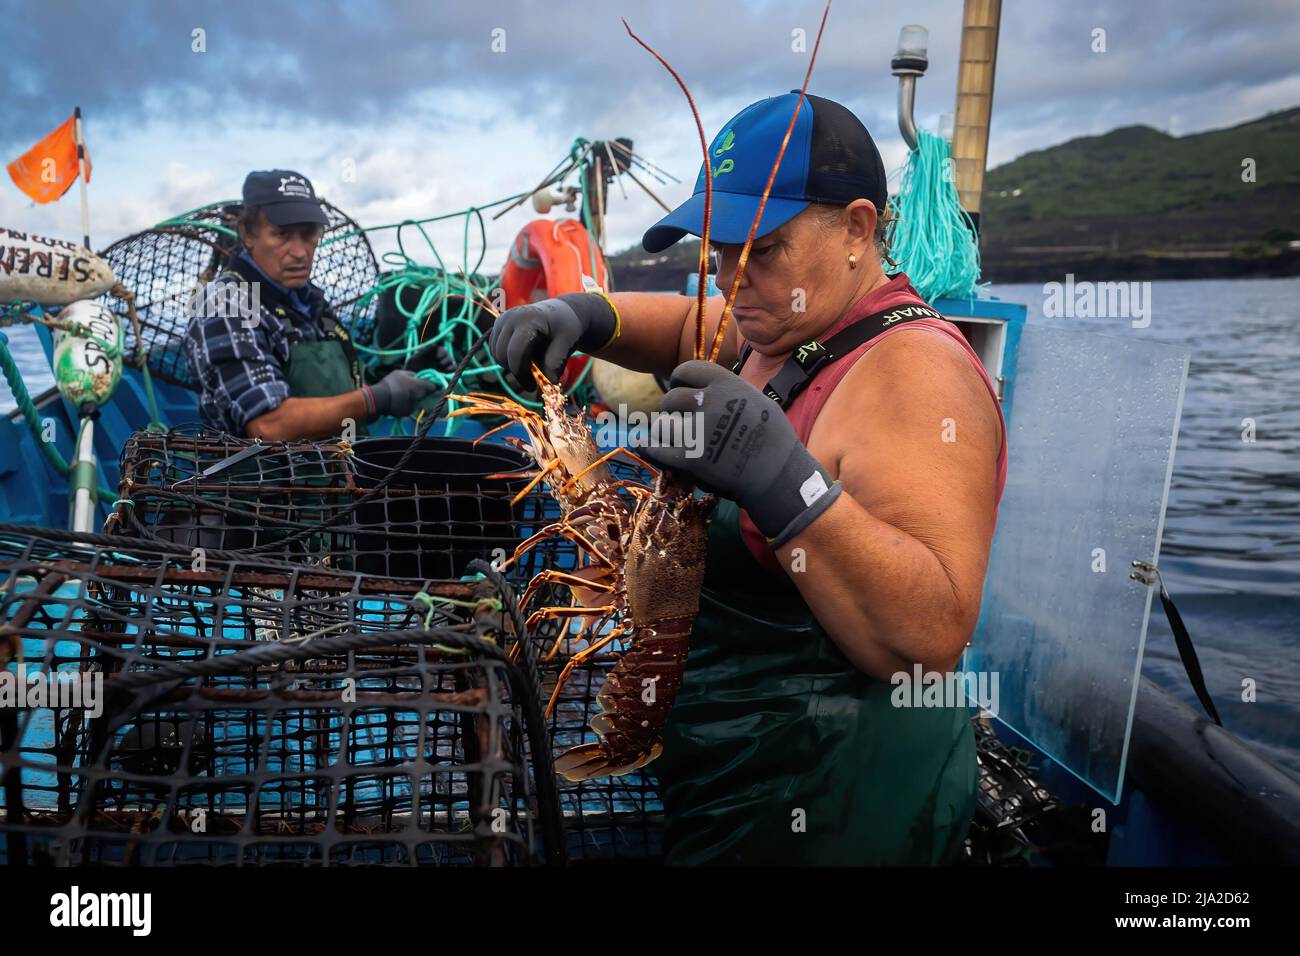 Portugal. 18th Aug, 2021. A fisherwoman removes a lobster from the cage inside the boat where she works. Women are well present in the fishing industry in the Azores islands, but only a few venture to the sea. Mostly work on land preparing baits and nets and cleaning or selling fish. Today, there are only five fisherwomen that go into the sea, making them probably the last fisherwomen in the archipelago. (Photo by Eduardo Leal/SOPA Images/Sipa USA) Credit: Sipa USA/Alamy Live News Stock Photo